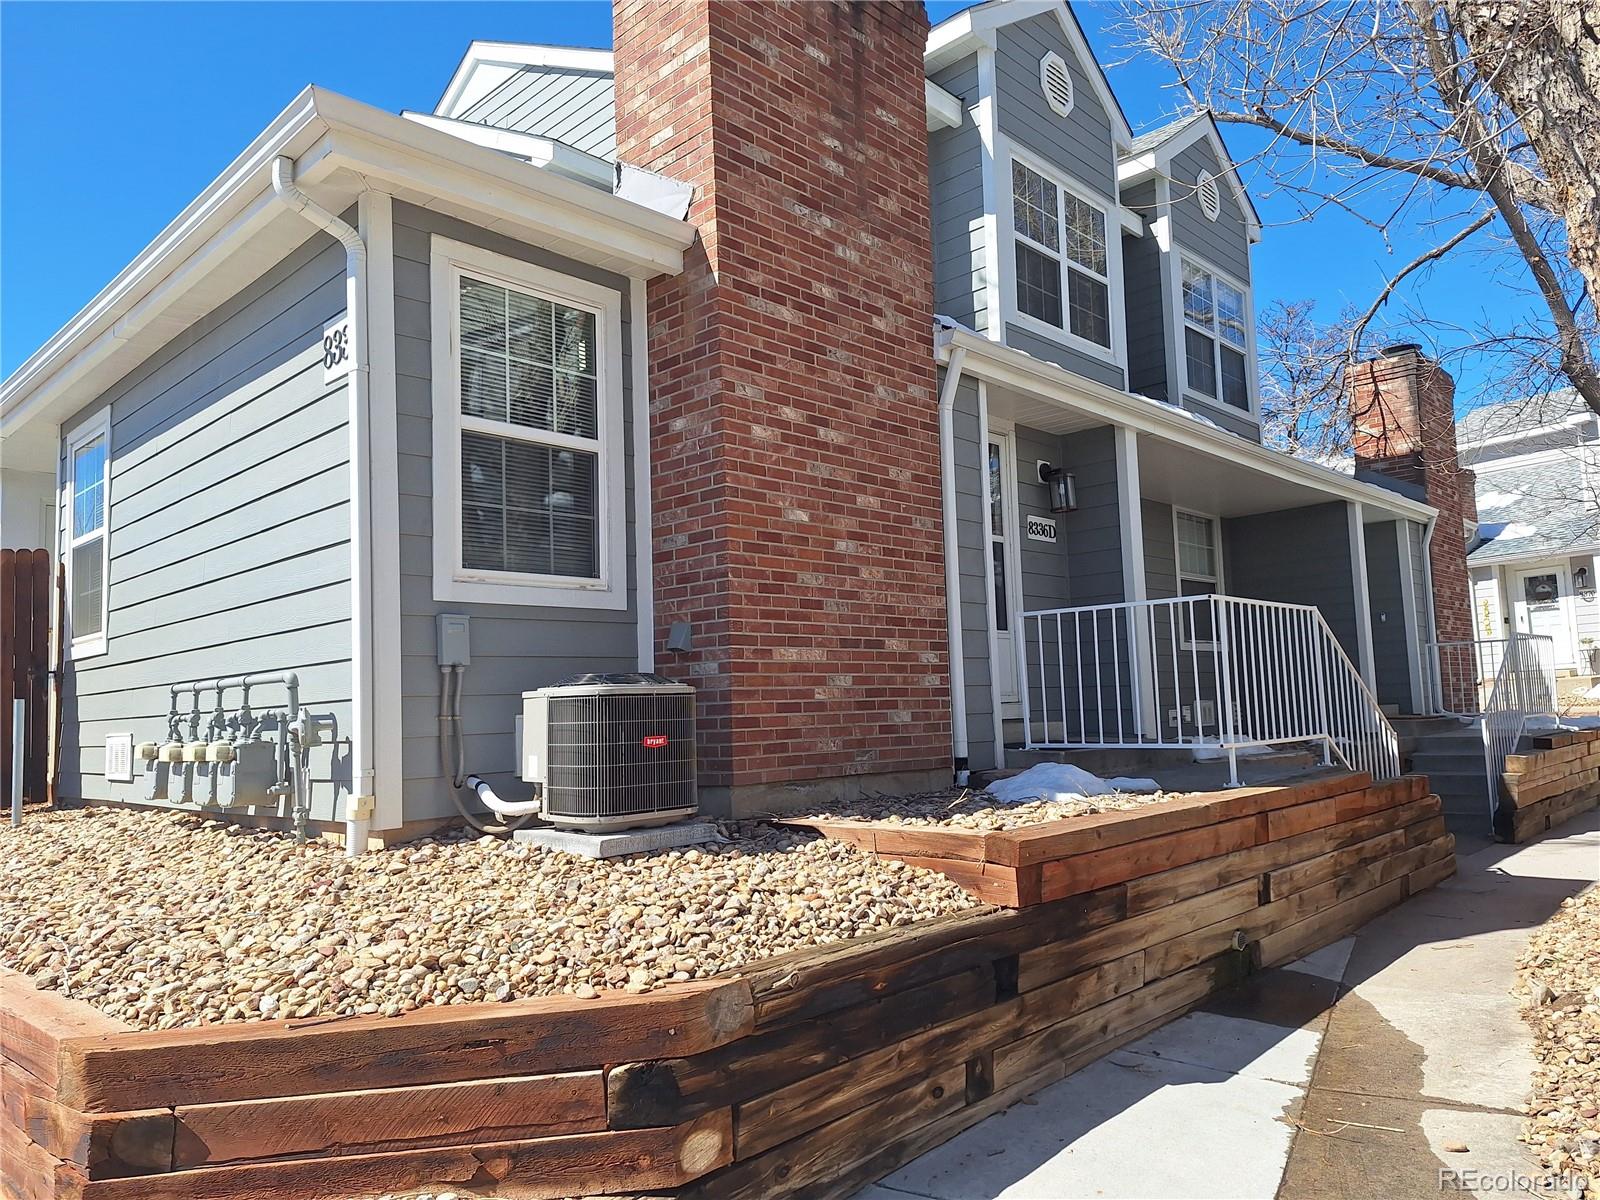 8336 W 87th Drive D, Arvada  MLS: 2650336 Beds: 2 Baths: 2 Price: $399,500